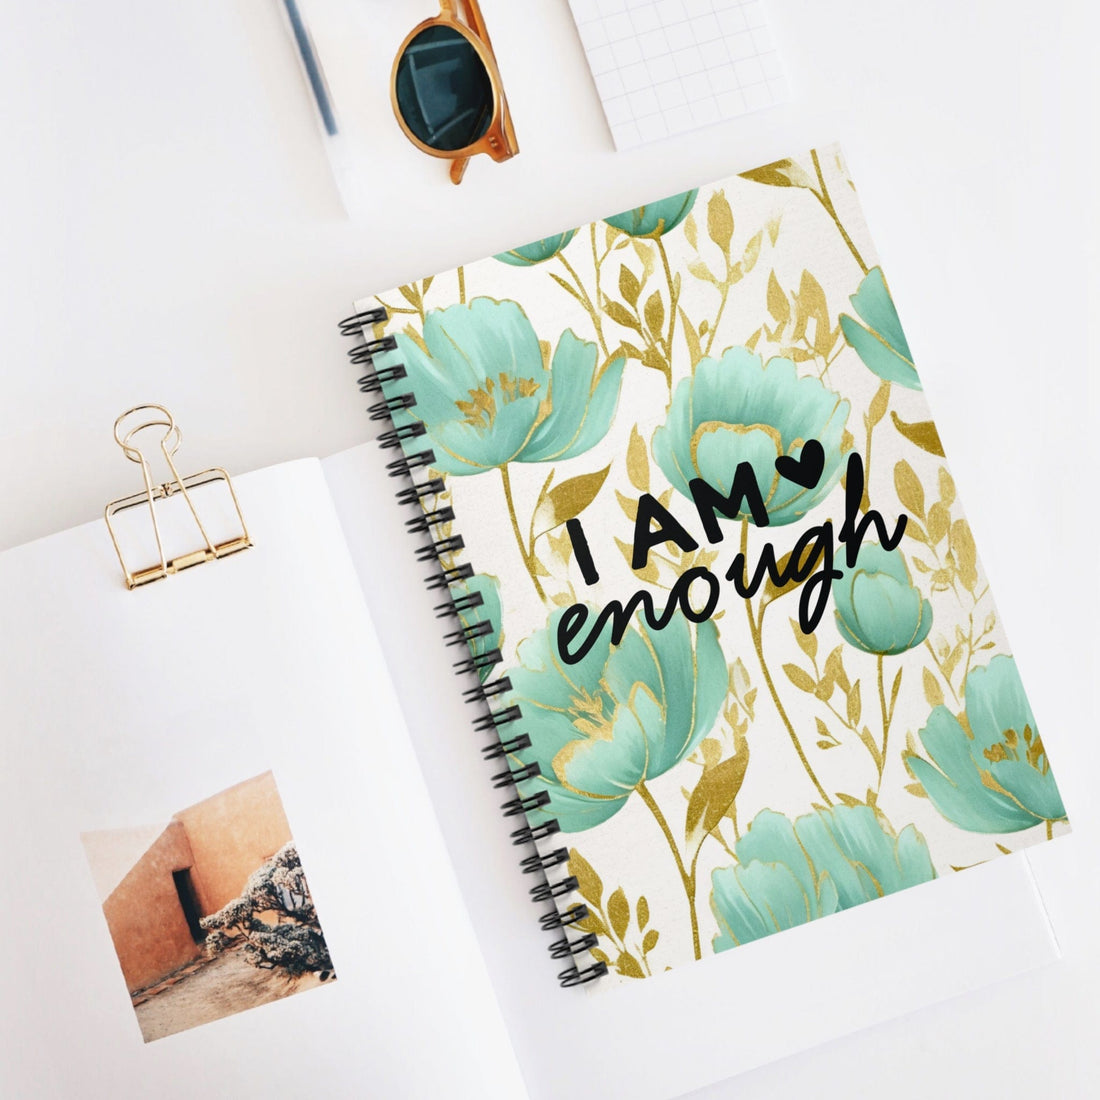 Beautiful Floral Spiral Notebook, Lined Journal, Metallic Watercolor, with Motivational Quote, I am enough